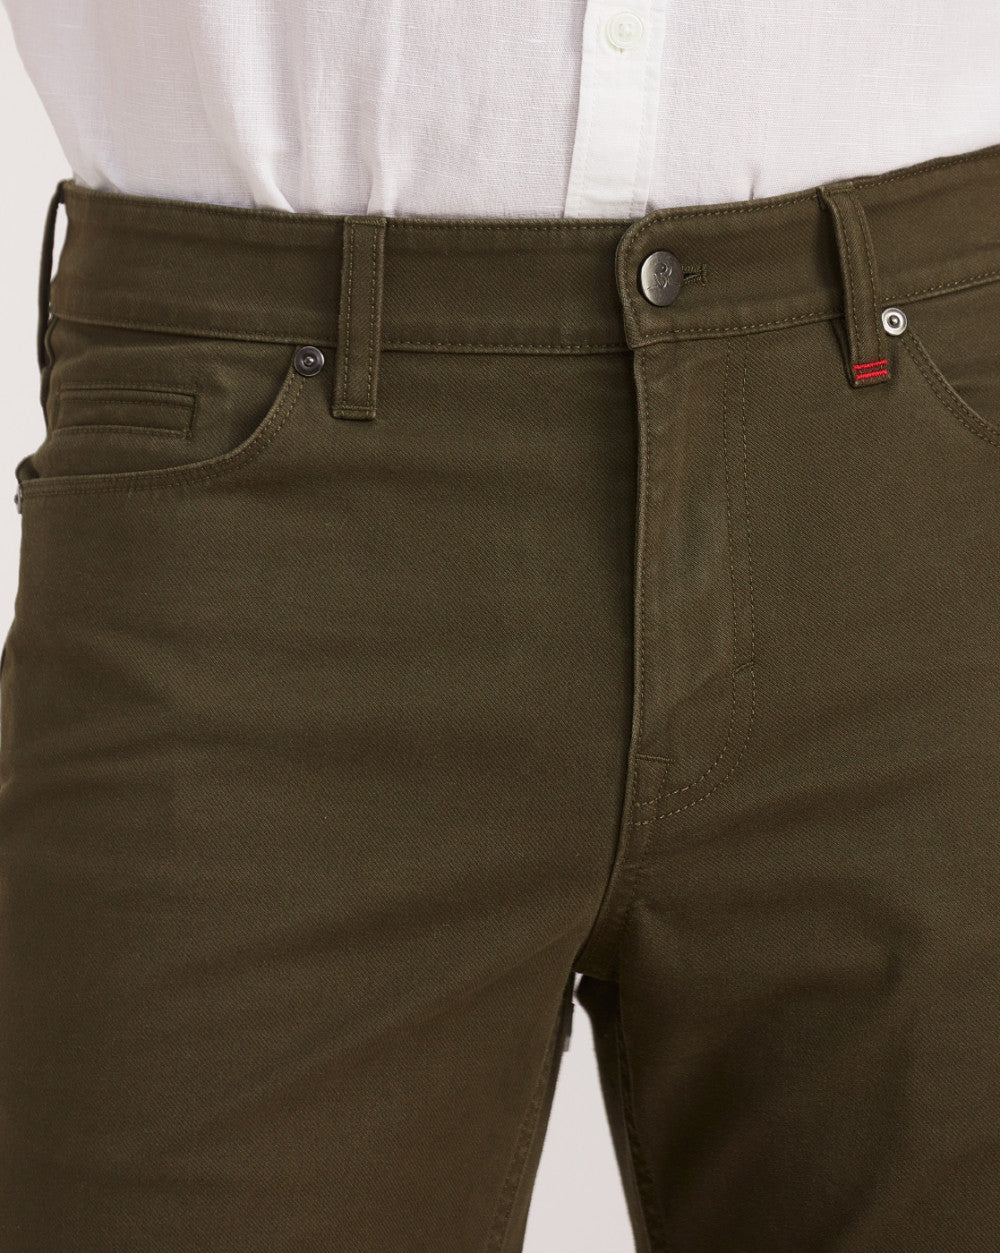 Straight Fit Five-Pocket Luxe Pants - Camo Green